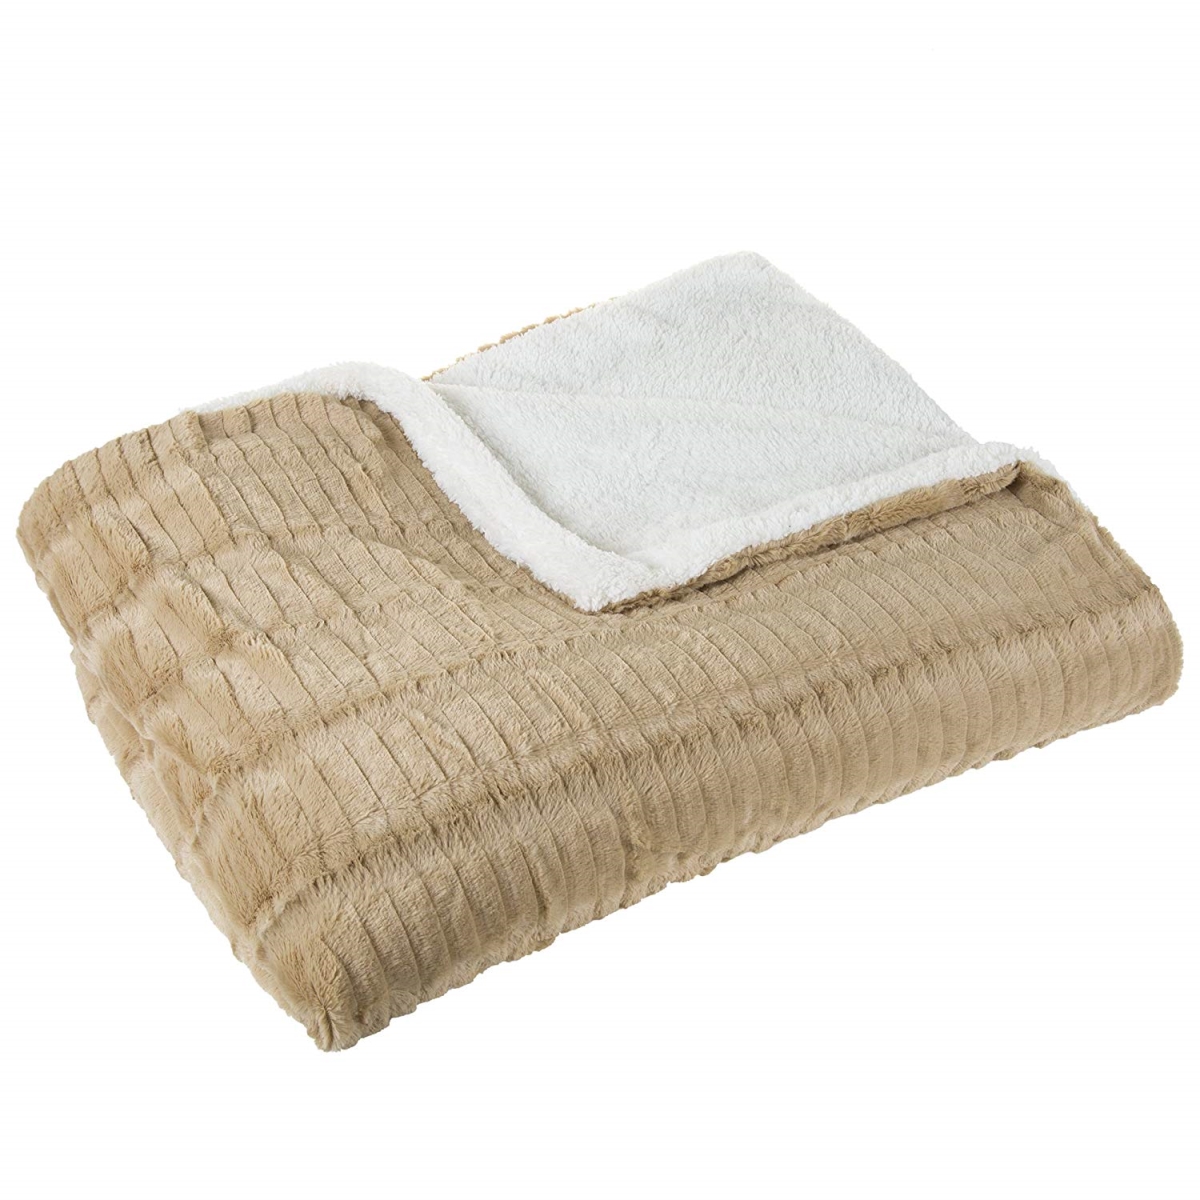 61a-01084 Fleece & Sherpa Blanket, Full & Queen Size - Taupe